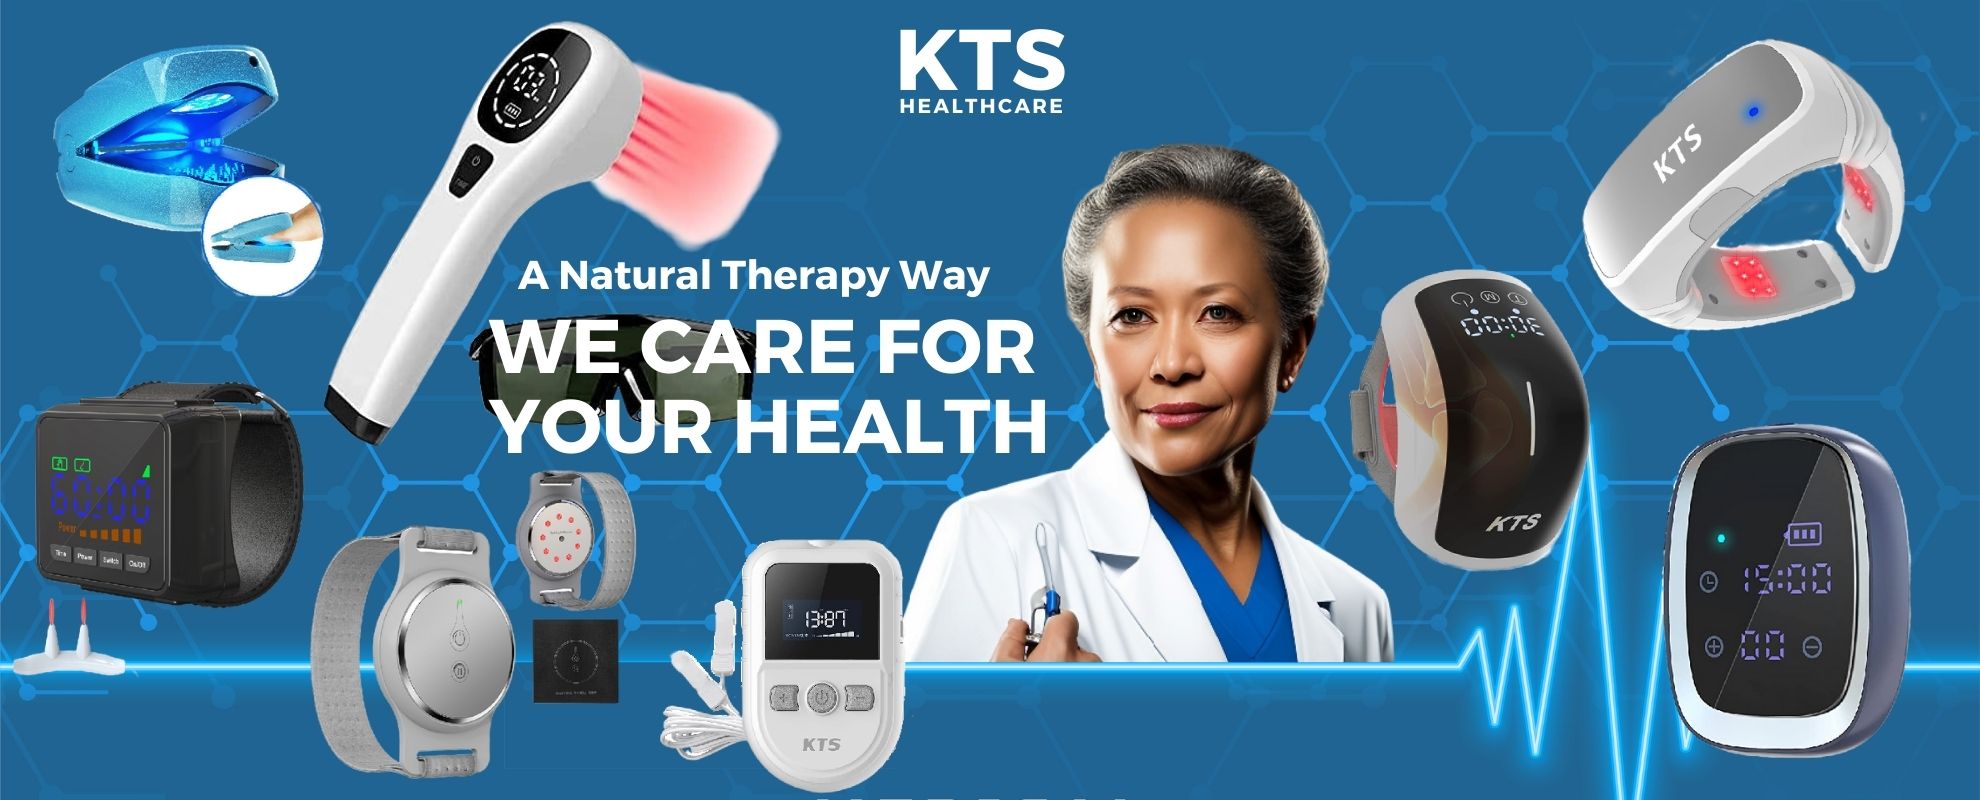 KTS Sciatica Pain Relief Devices, Relief Lower Back Pain, Red Light Therapy  for Herniated Disc and Scoliosis, Breathable and Lightweight